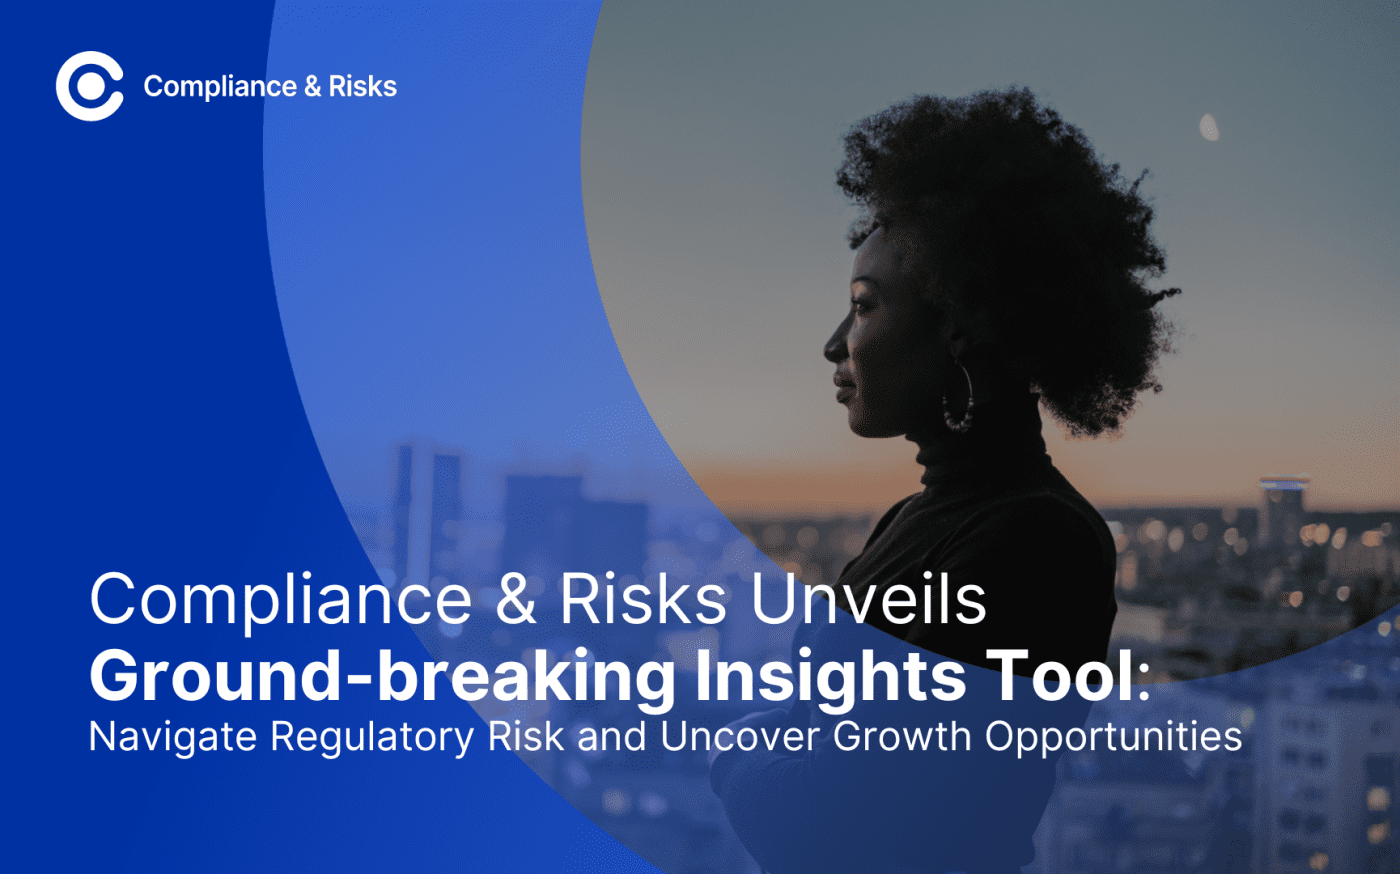 Compliance & Risks Unveils Groundbreaking Insights Tool: Navigate Regulatory Risk and Uncover Growth Opportunities  